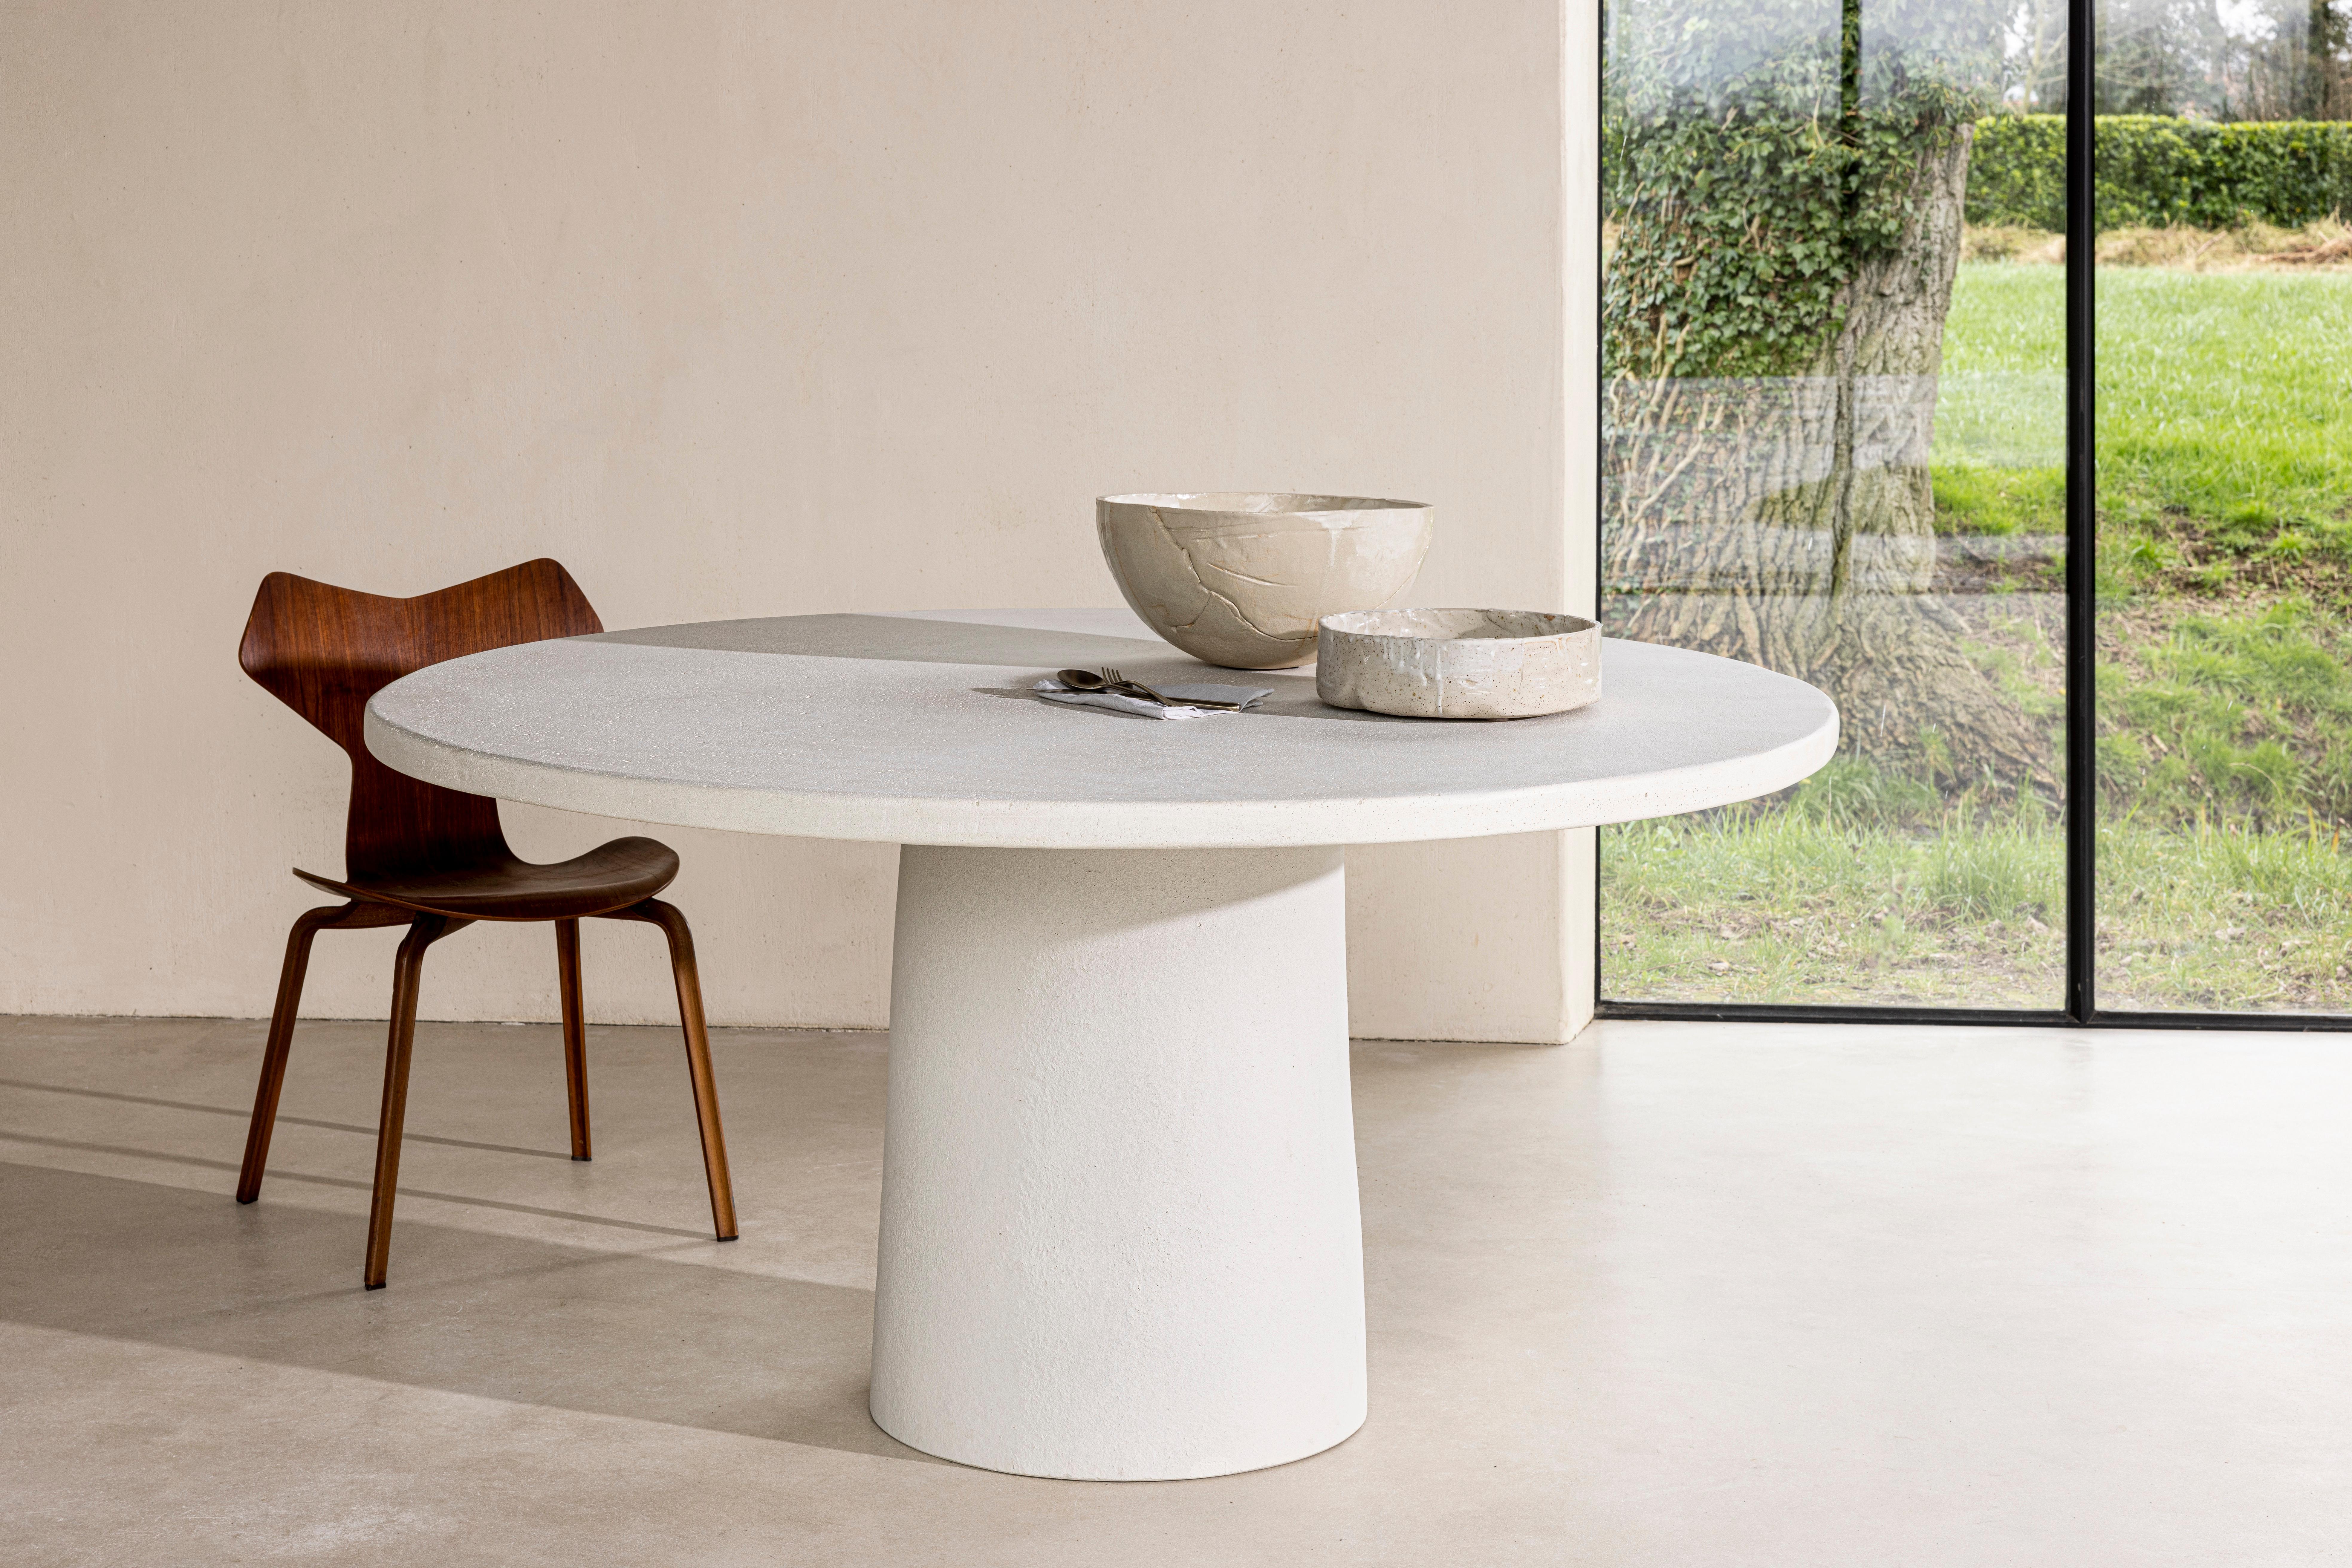 Stone table by Studio Loho
Dimensions: D 120 x H 75 cm
Materials: clay
Available in other sizes: From 120cm to 220cm.

The table is made of two parts: a tabletop on a central pedestal. The tabletop is made of composite concrete, having mostly